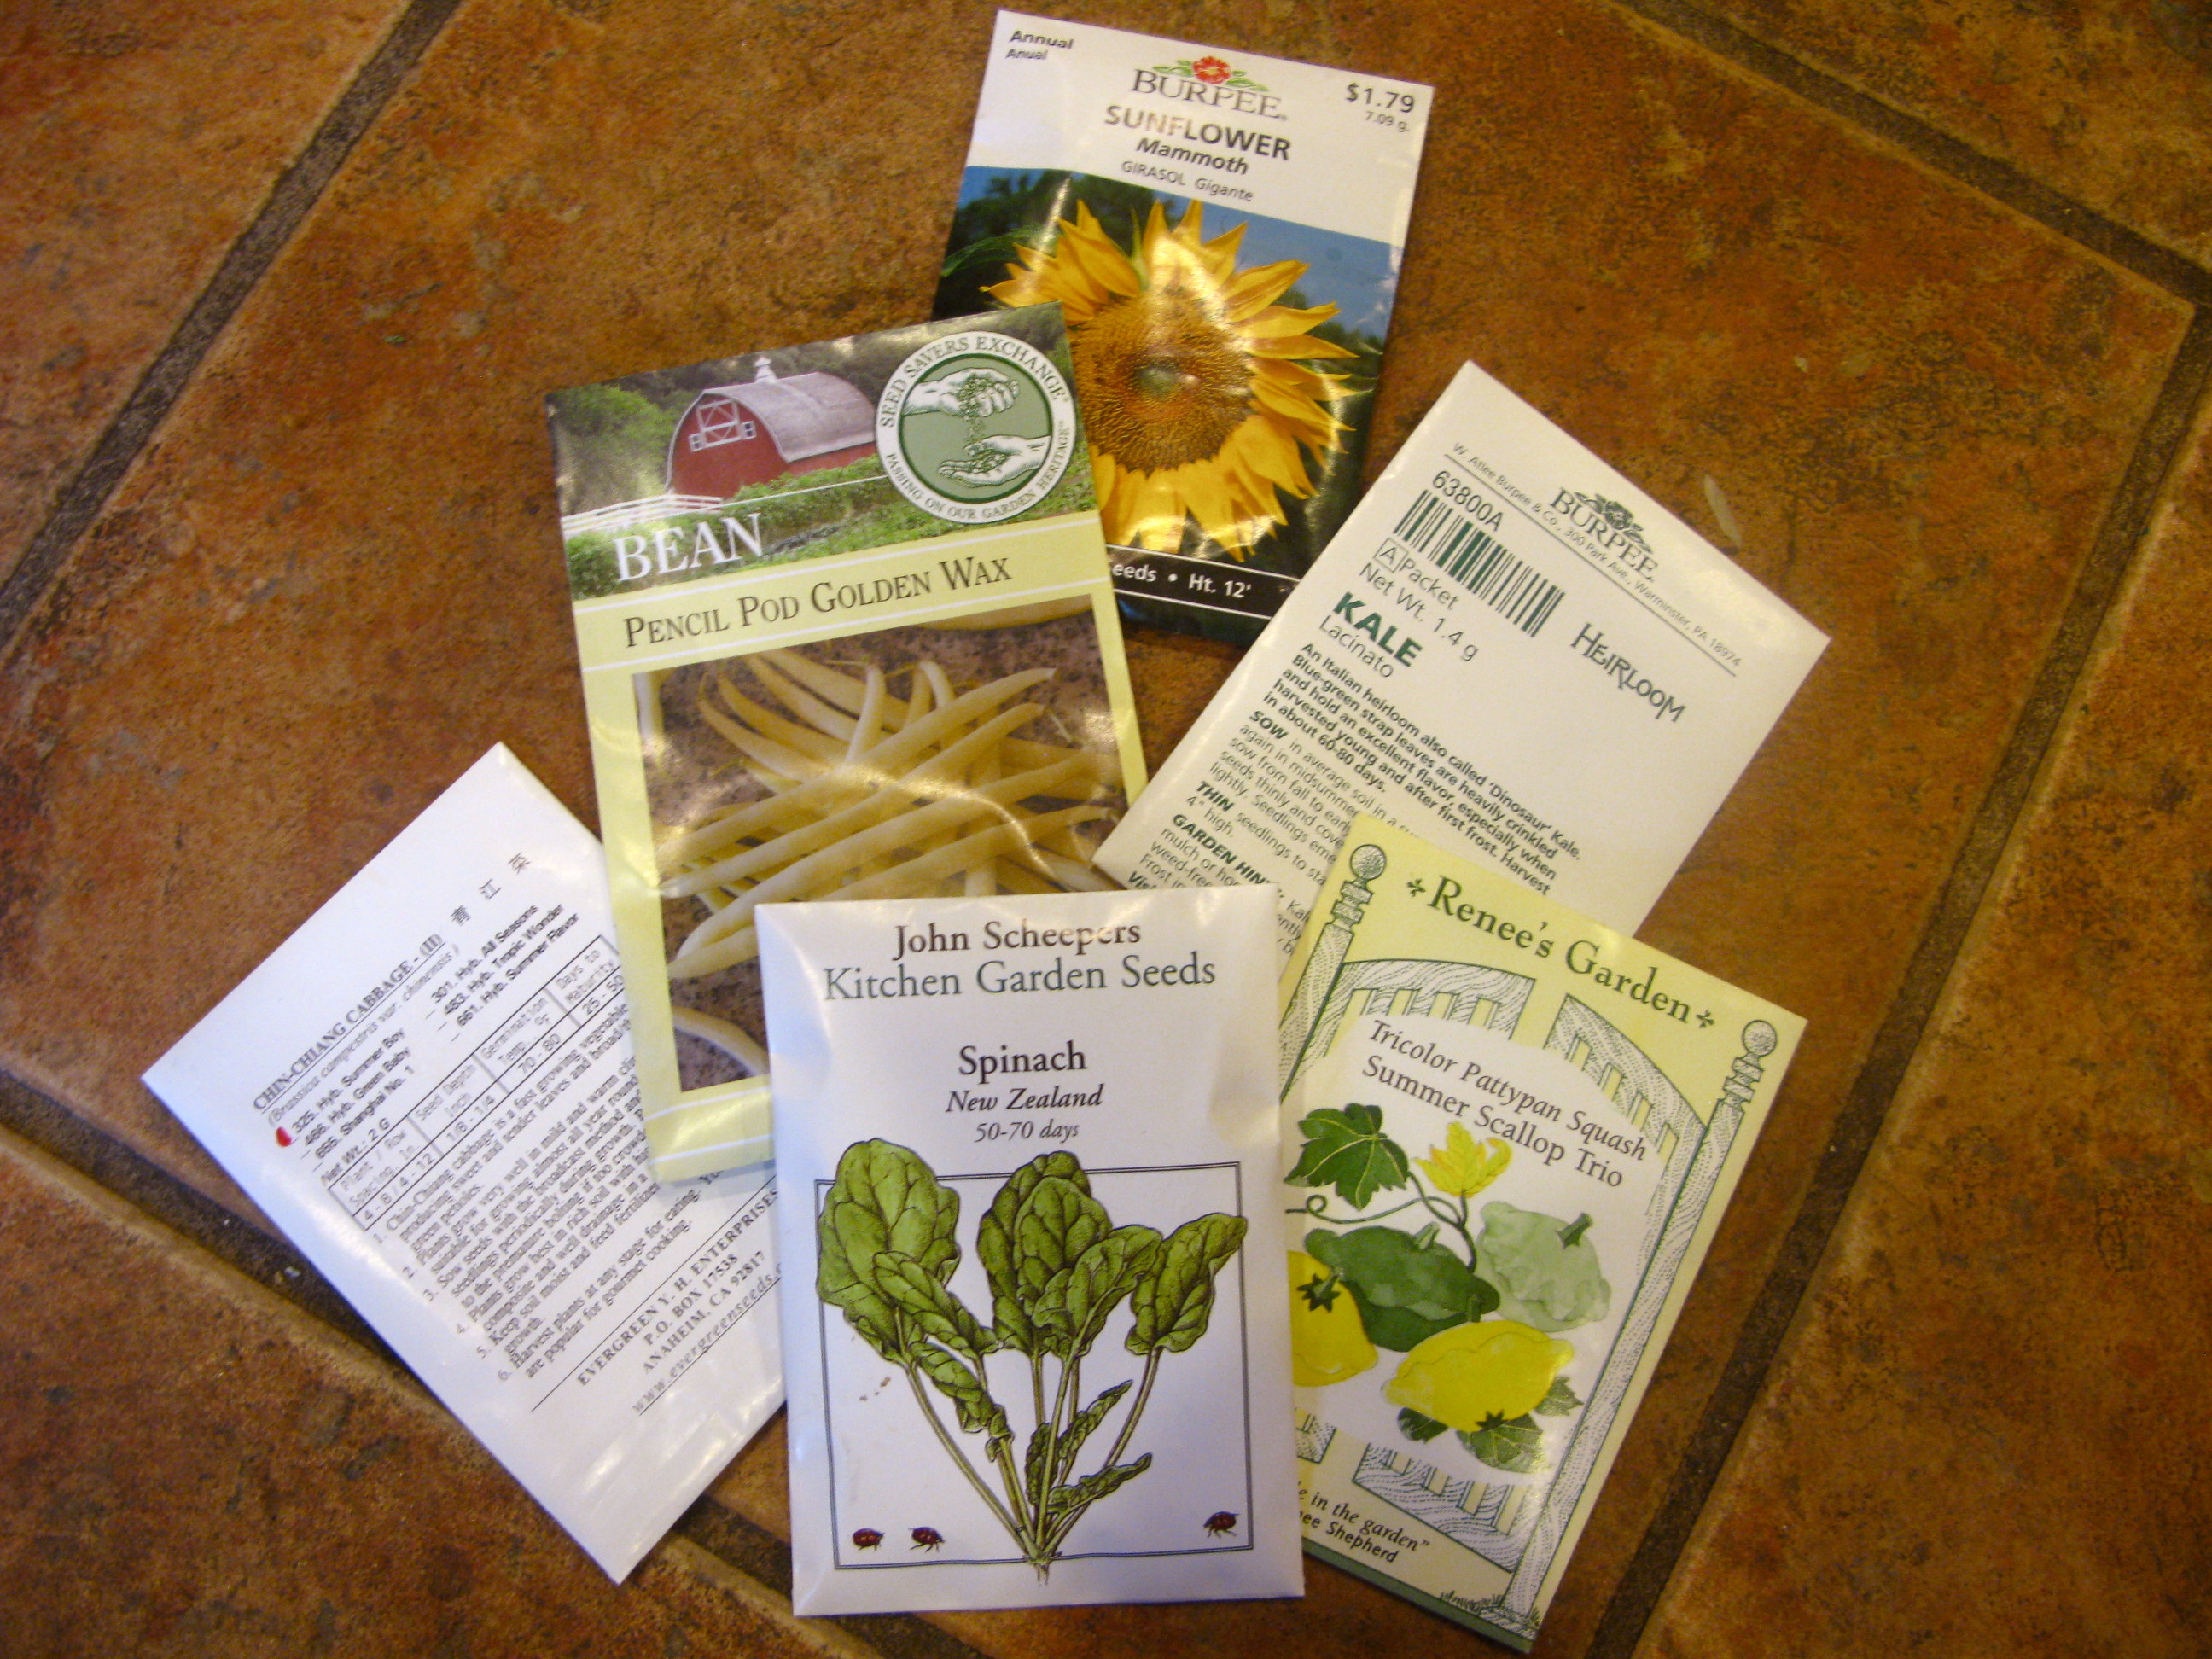 How to Read a Seed Packet